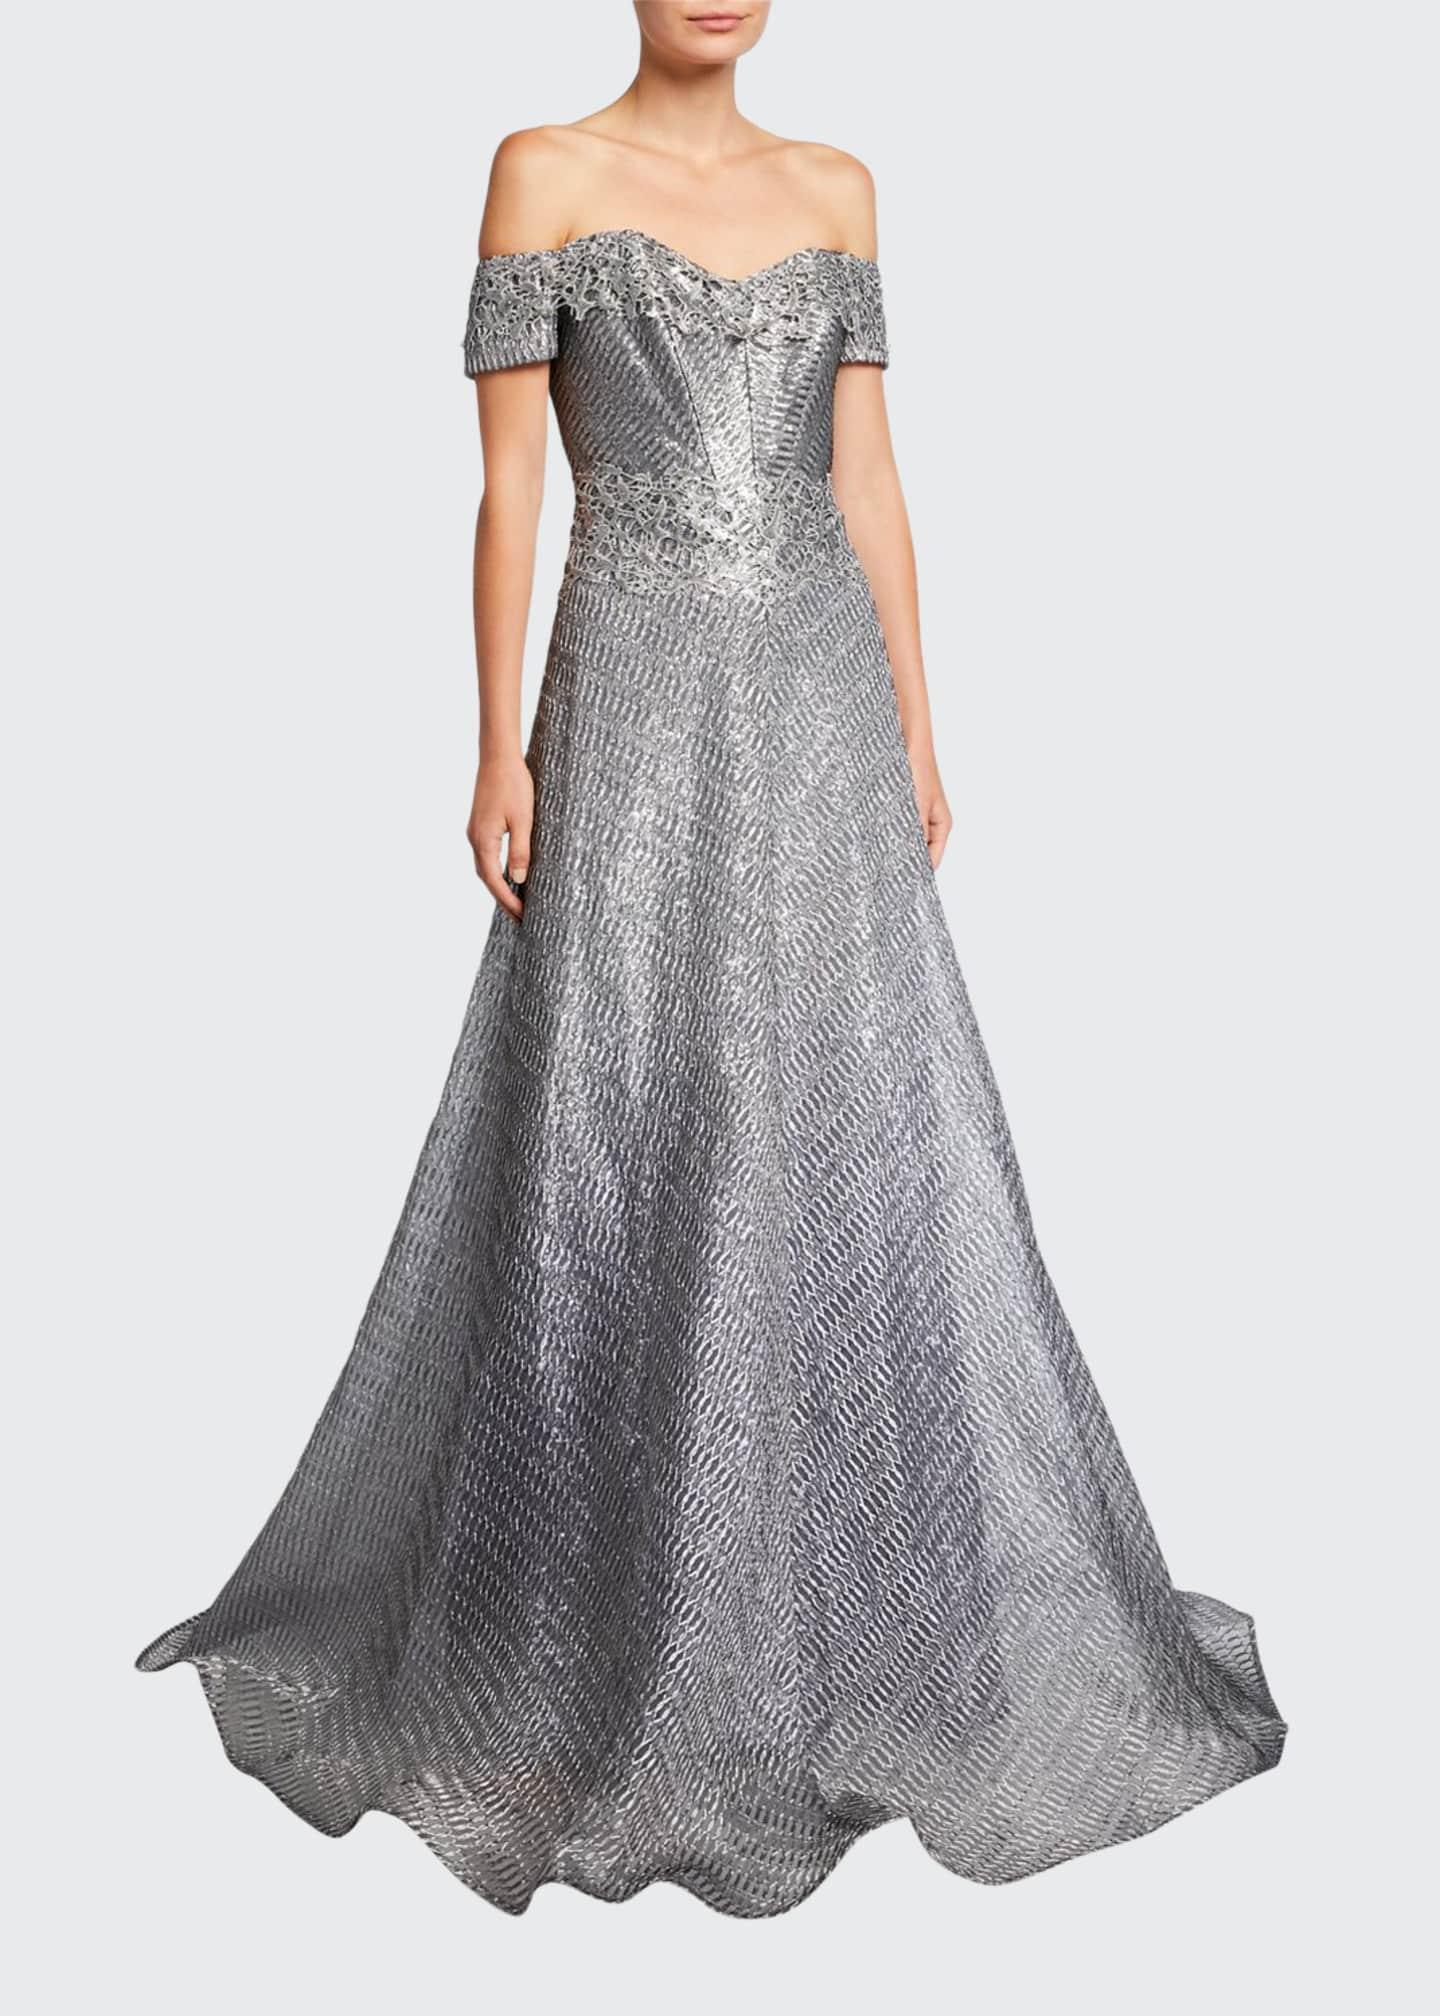 Rene Ruiz Synthetic Off-the-shoulder Short-sleeve Gown in Silver ...